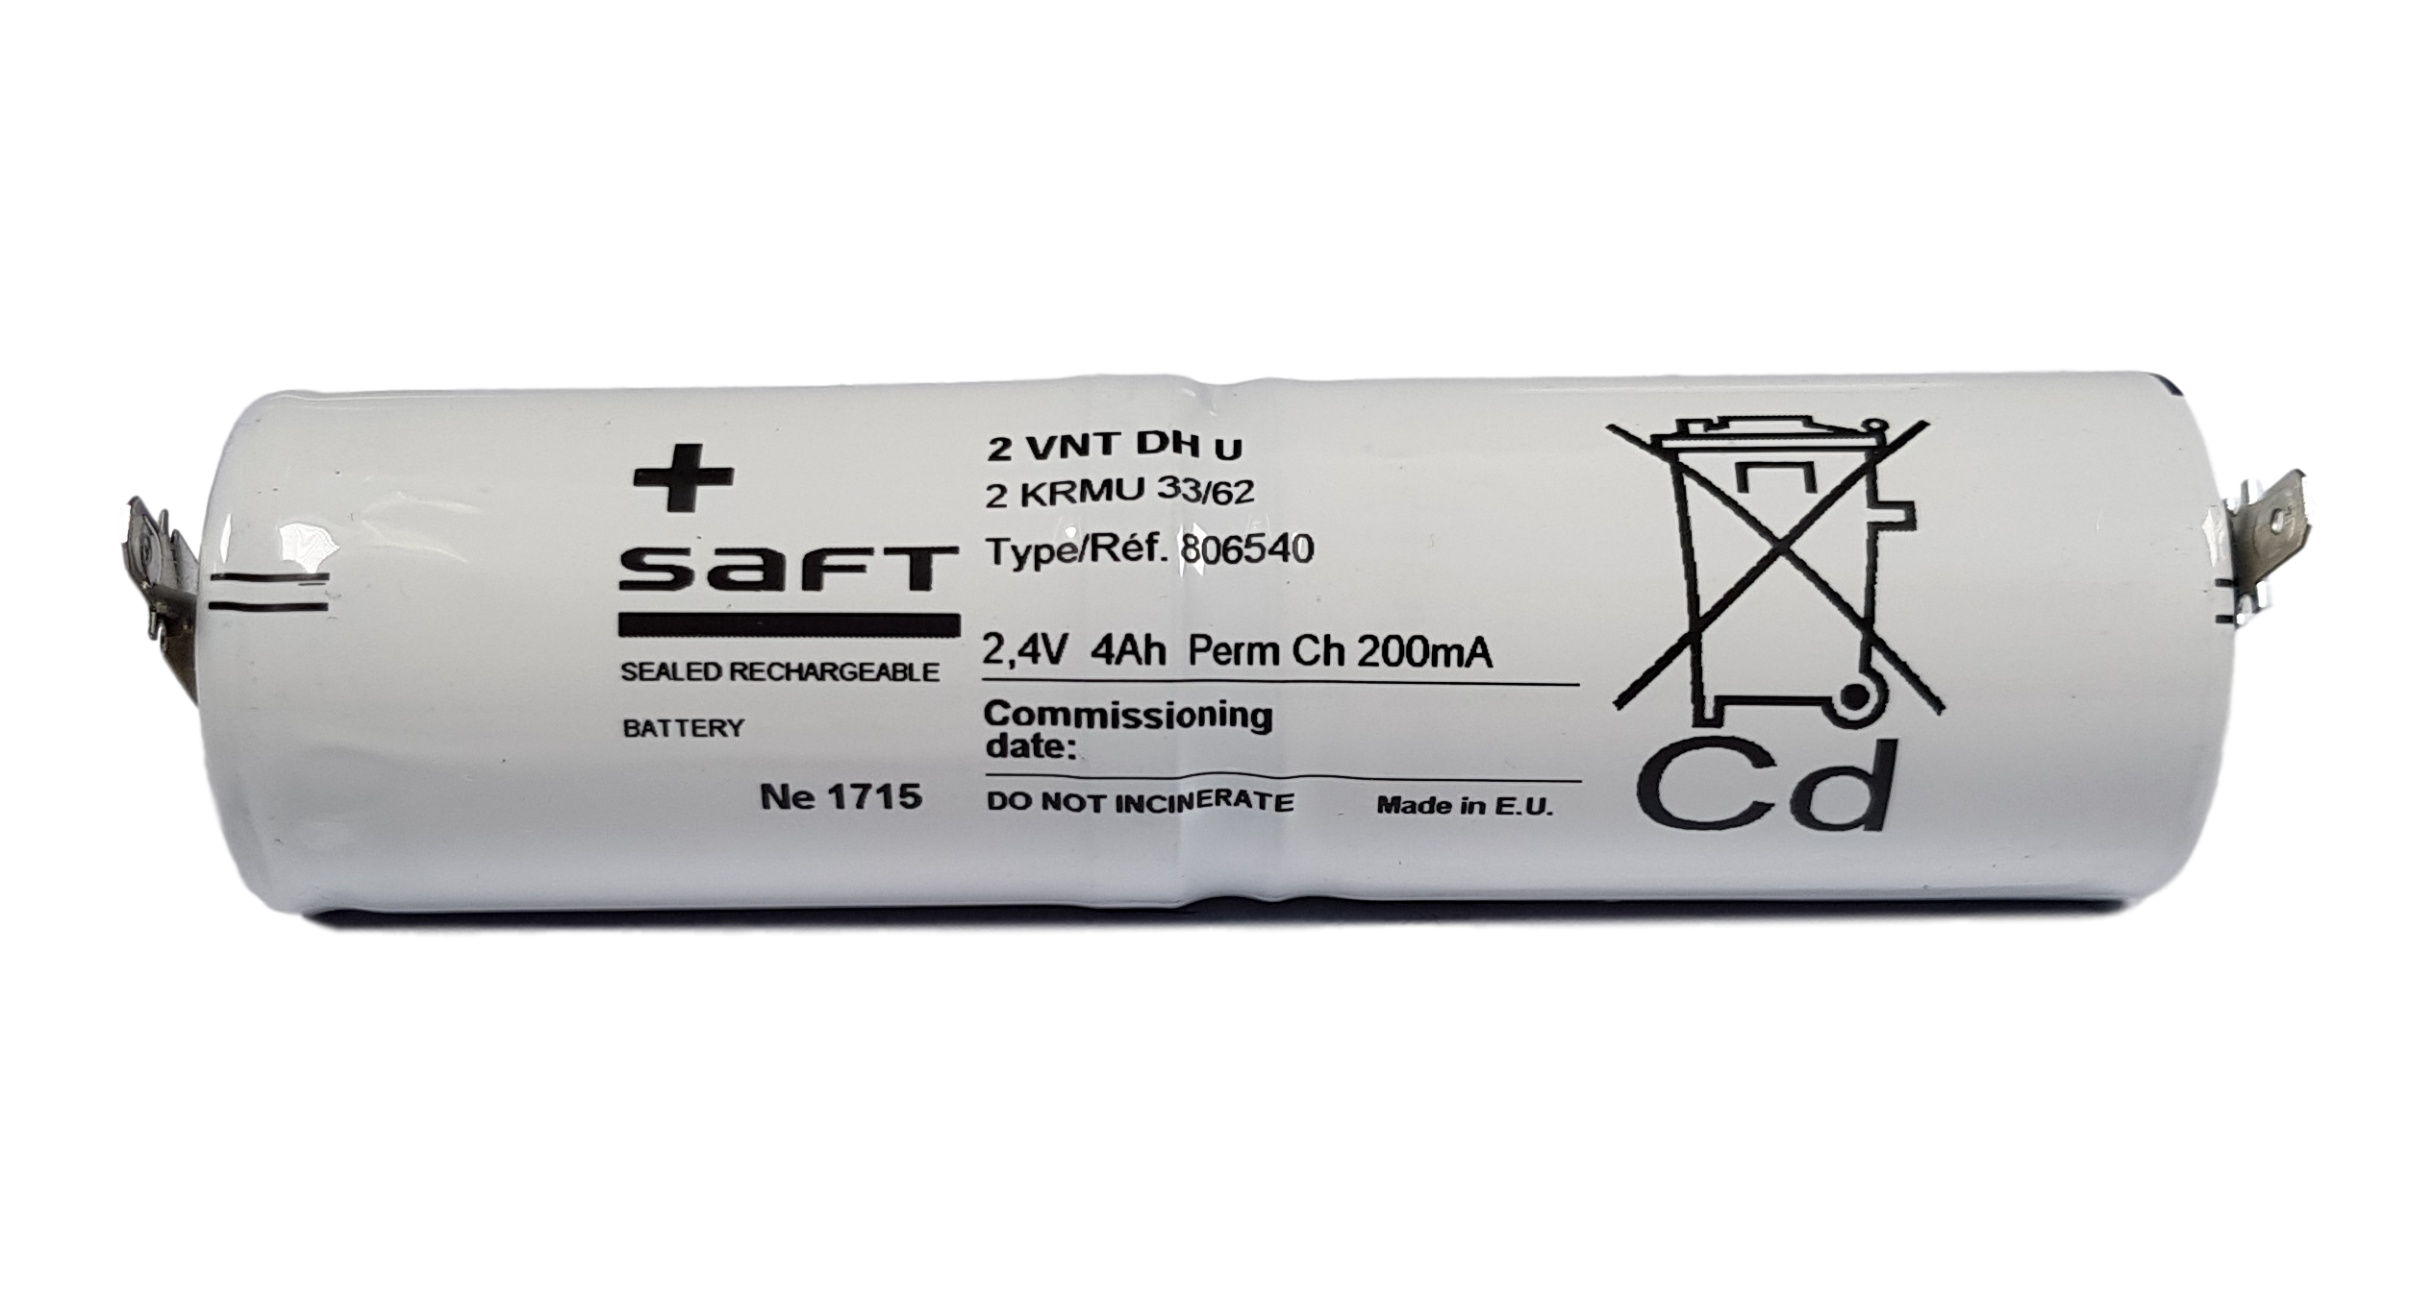 SAFT Noodverlichting accu Staaf NiCd 2,4V 4000mAh 